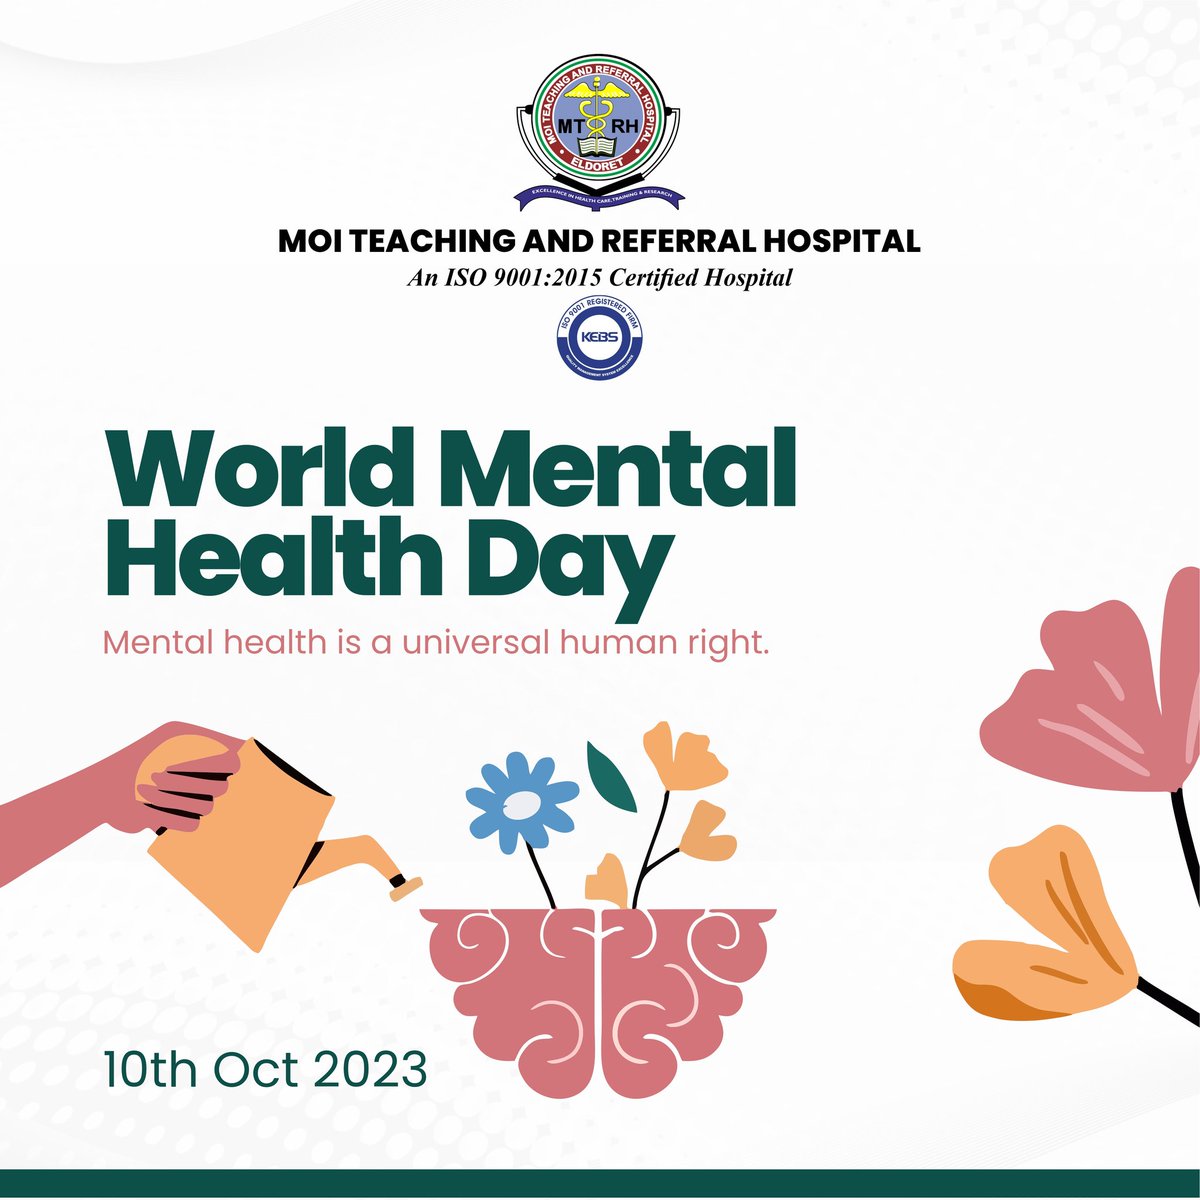 Mental health is a universal human right. #WMHD2023